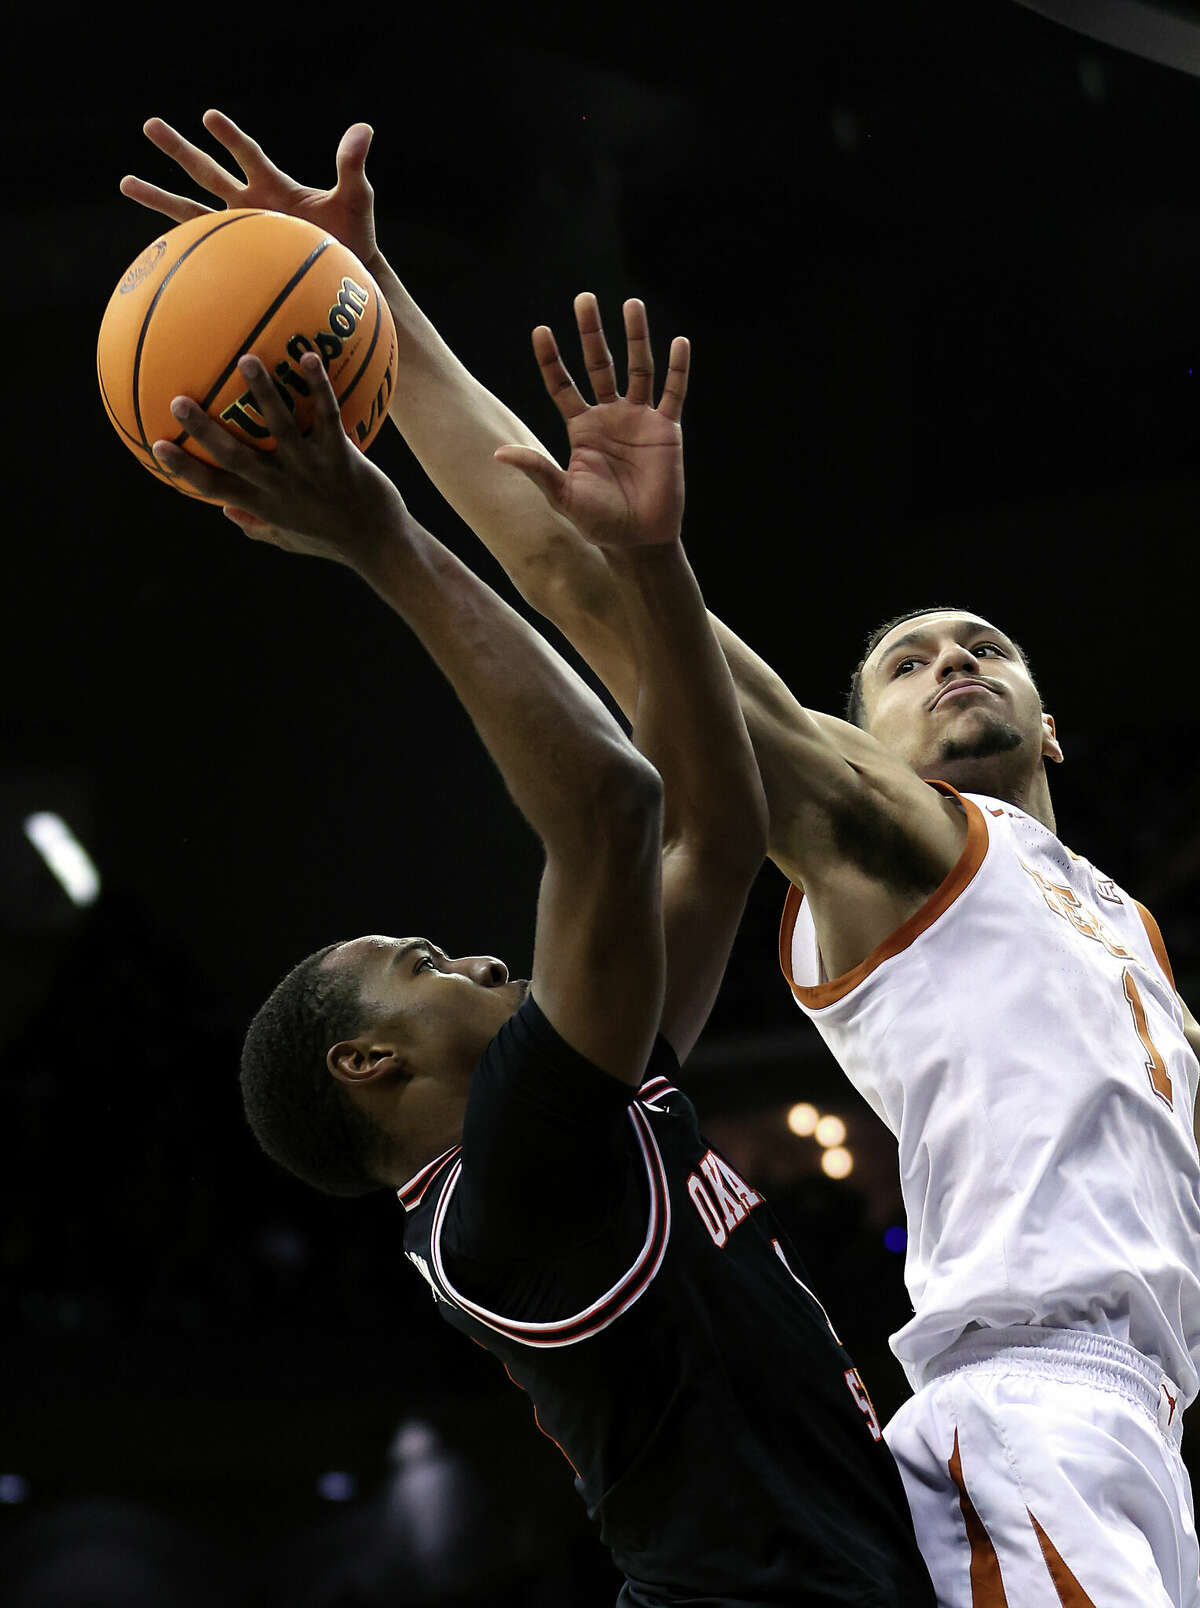 KANSAS CITY, MISSOURI - MARCH 09: Dylan Disu #1 of the Texas Longhorns blocks a shot by Bryce Thompson #1 of the Oklahoma State Cowboys during the Big 12 Tournament game at T-Mobile Center on March 09, 2023 in Kansas City, Missouri. (Photo by Jamie Squire/Getty Images)